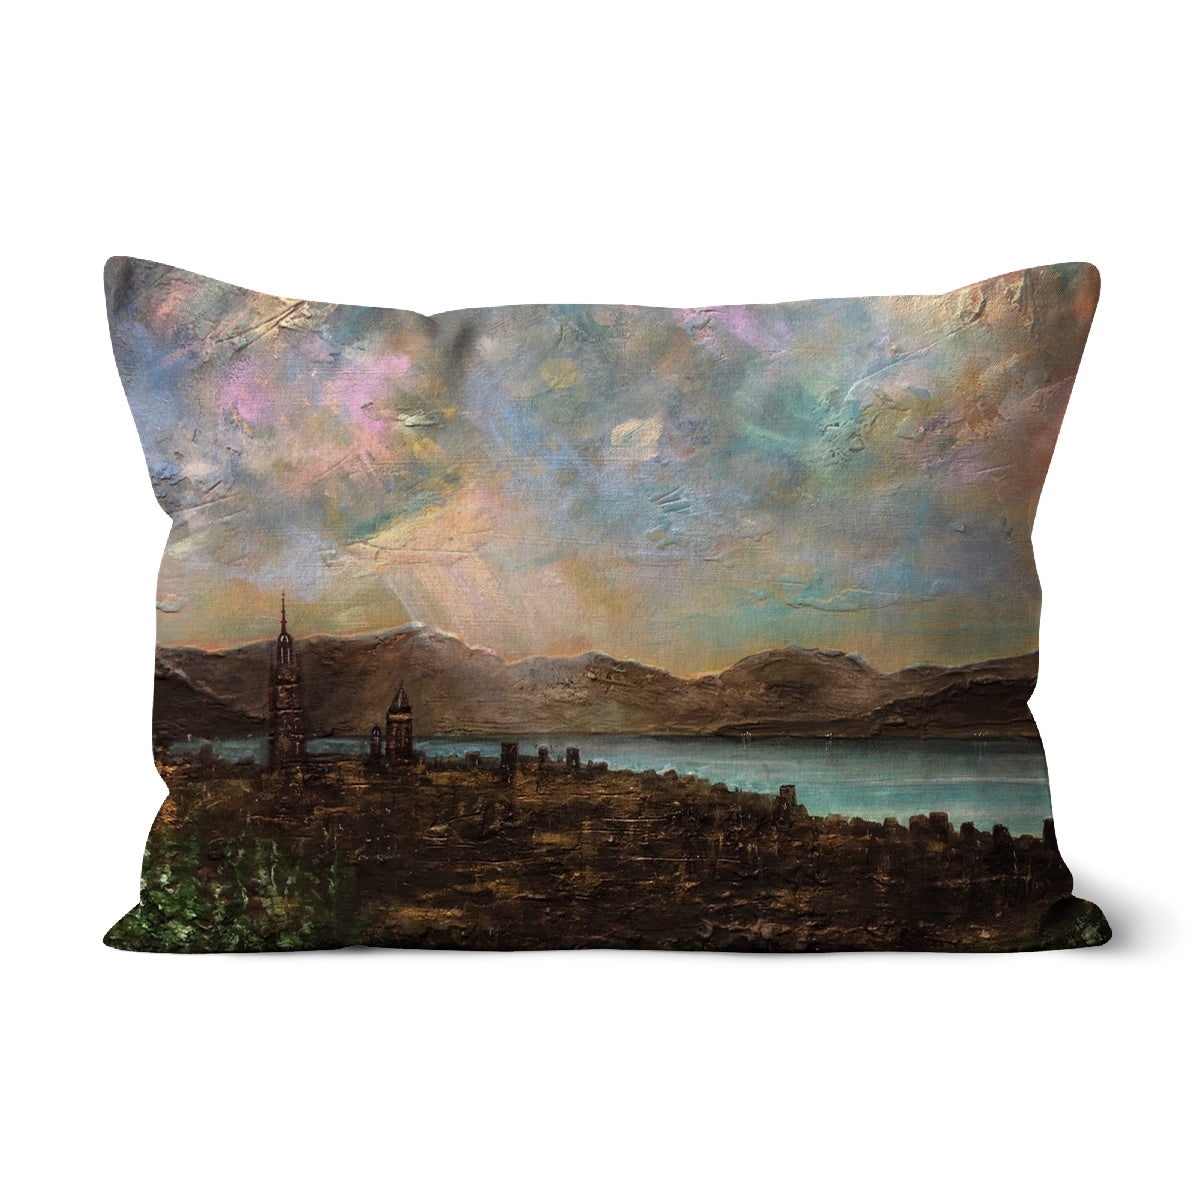 Angels Fingers Over Greenock Art Gifts Cushion-Cushions-River Clyde Art Gallery-Canvas-19"x13"-Paintings, Prints, Homeware, Art Gifts From Scotland By Scottish Artist Kevin Hunter